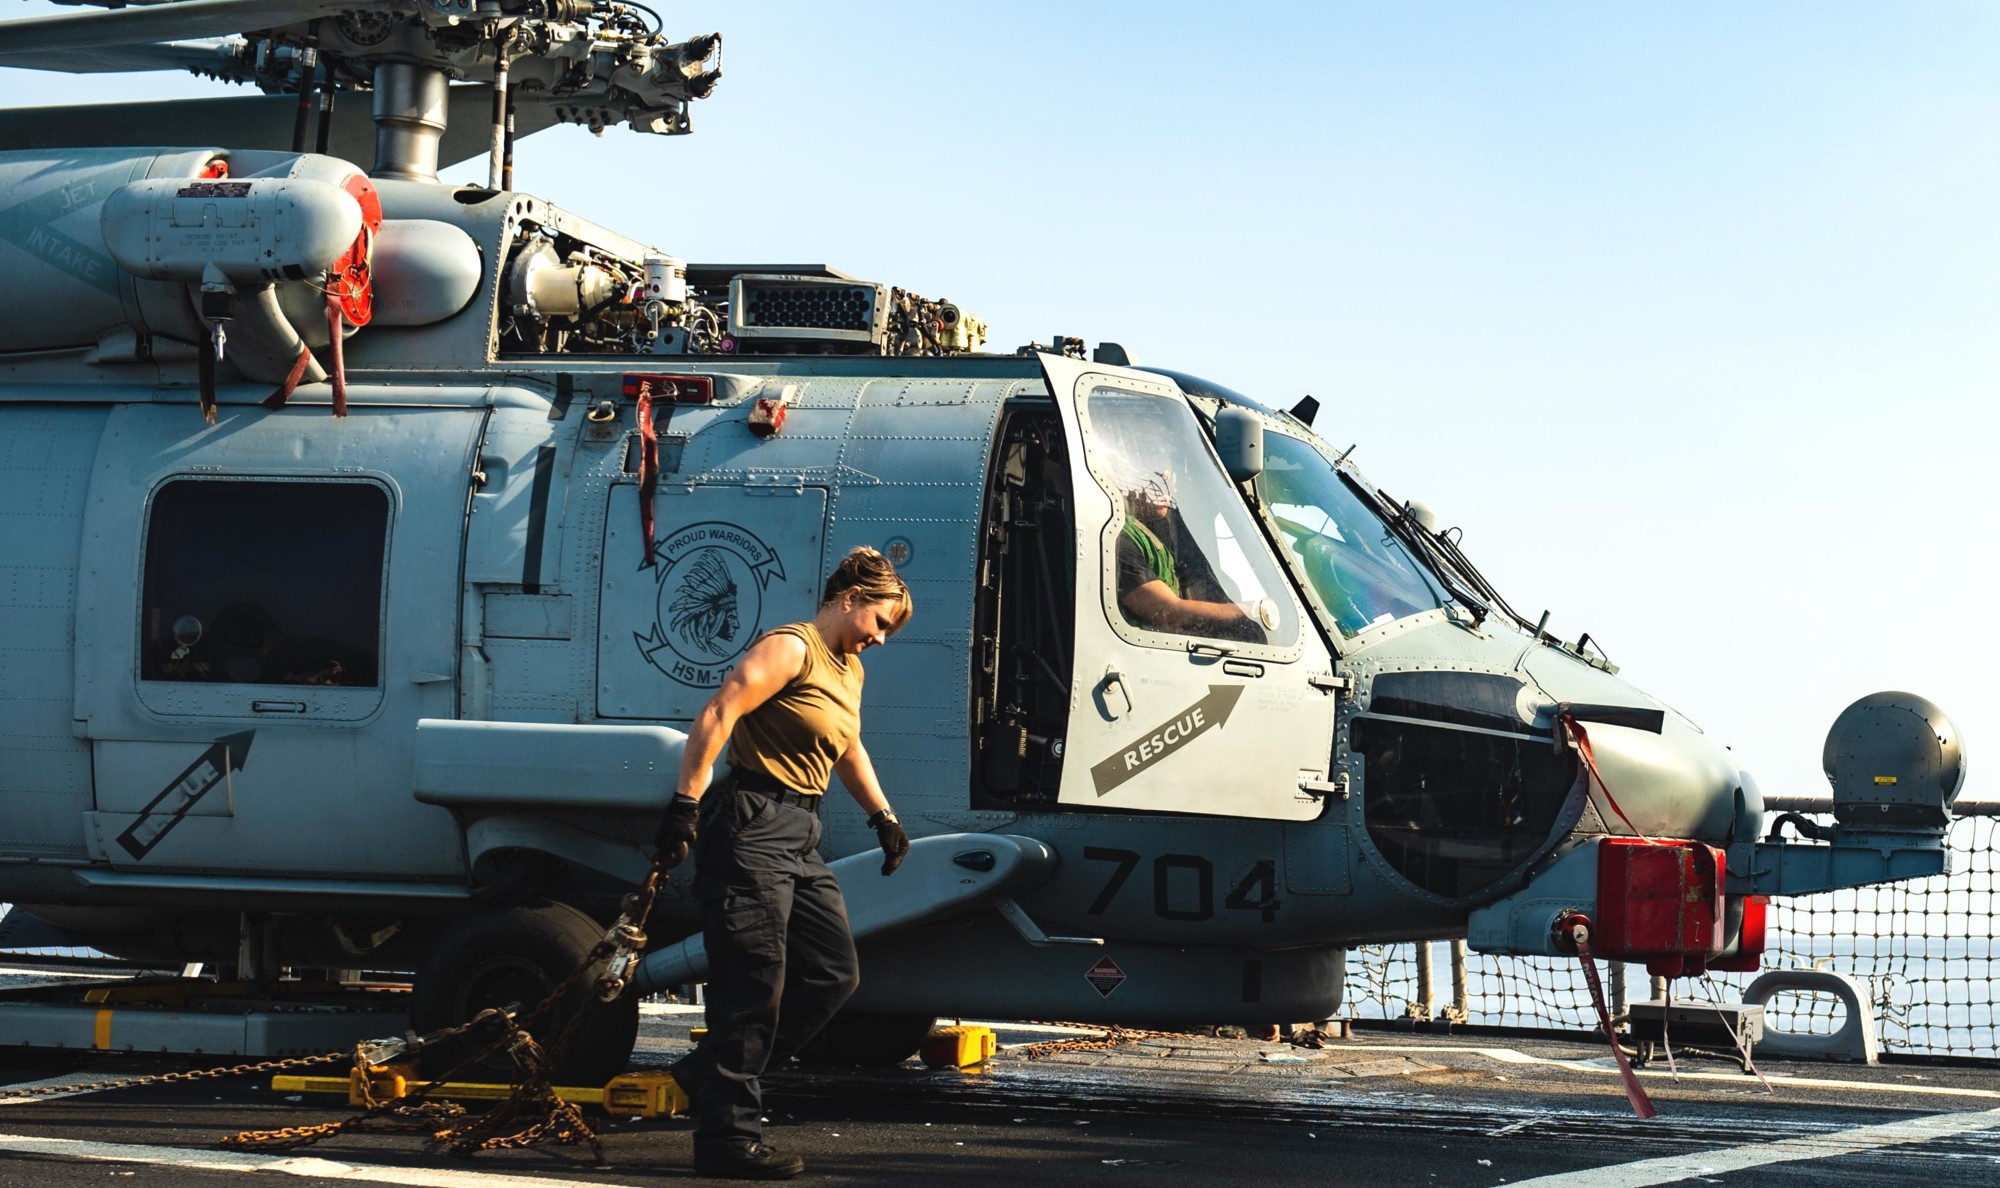 hsm-72 proud warriors helicopter maritime strike squadron mh-60r seahawk carrier air wing cvw-1 ddg uss farragut 43